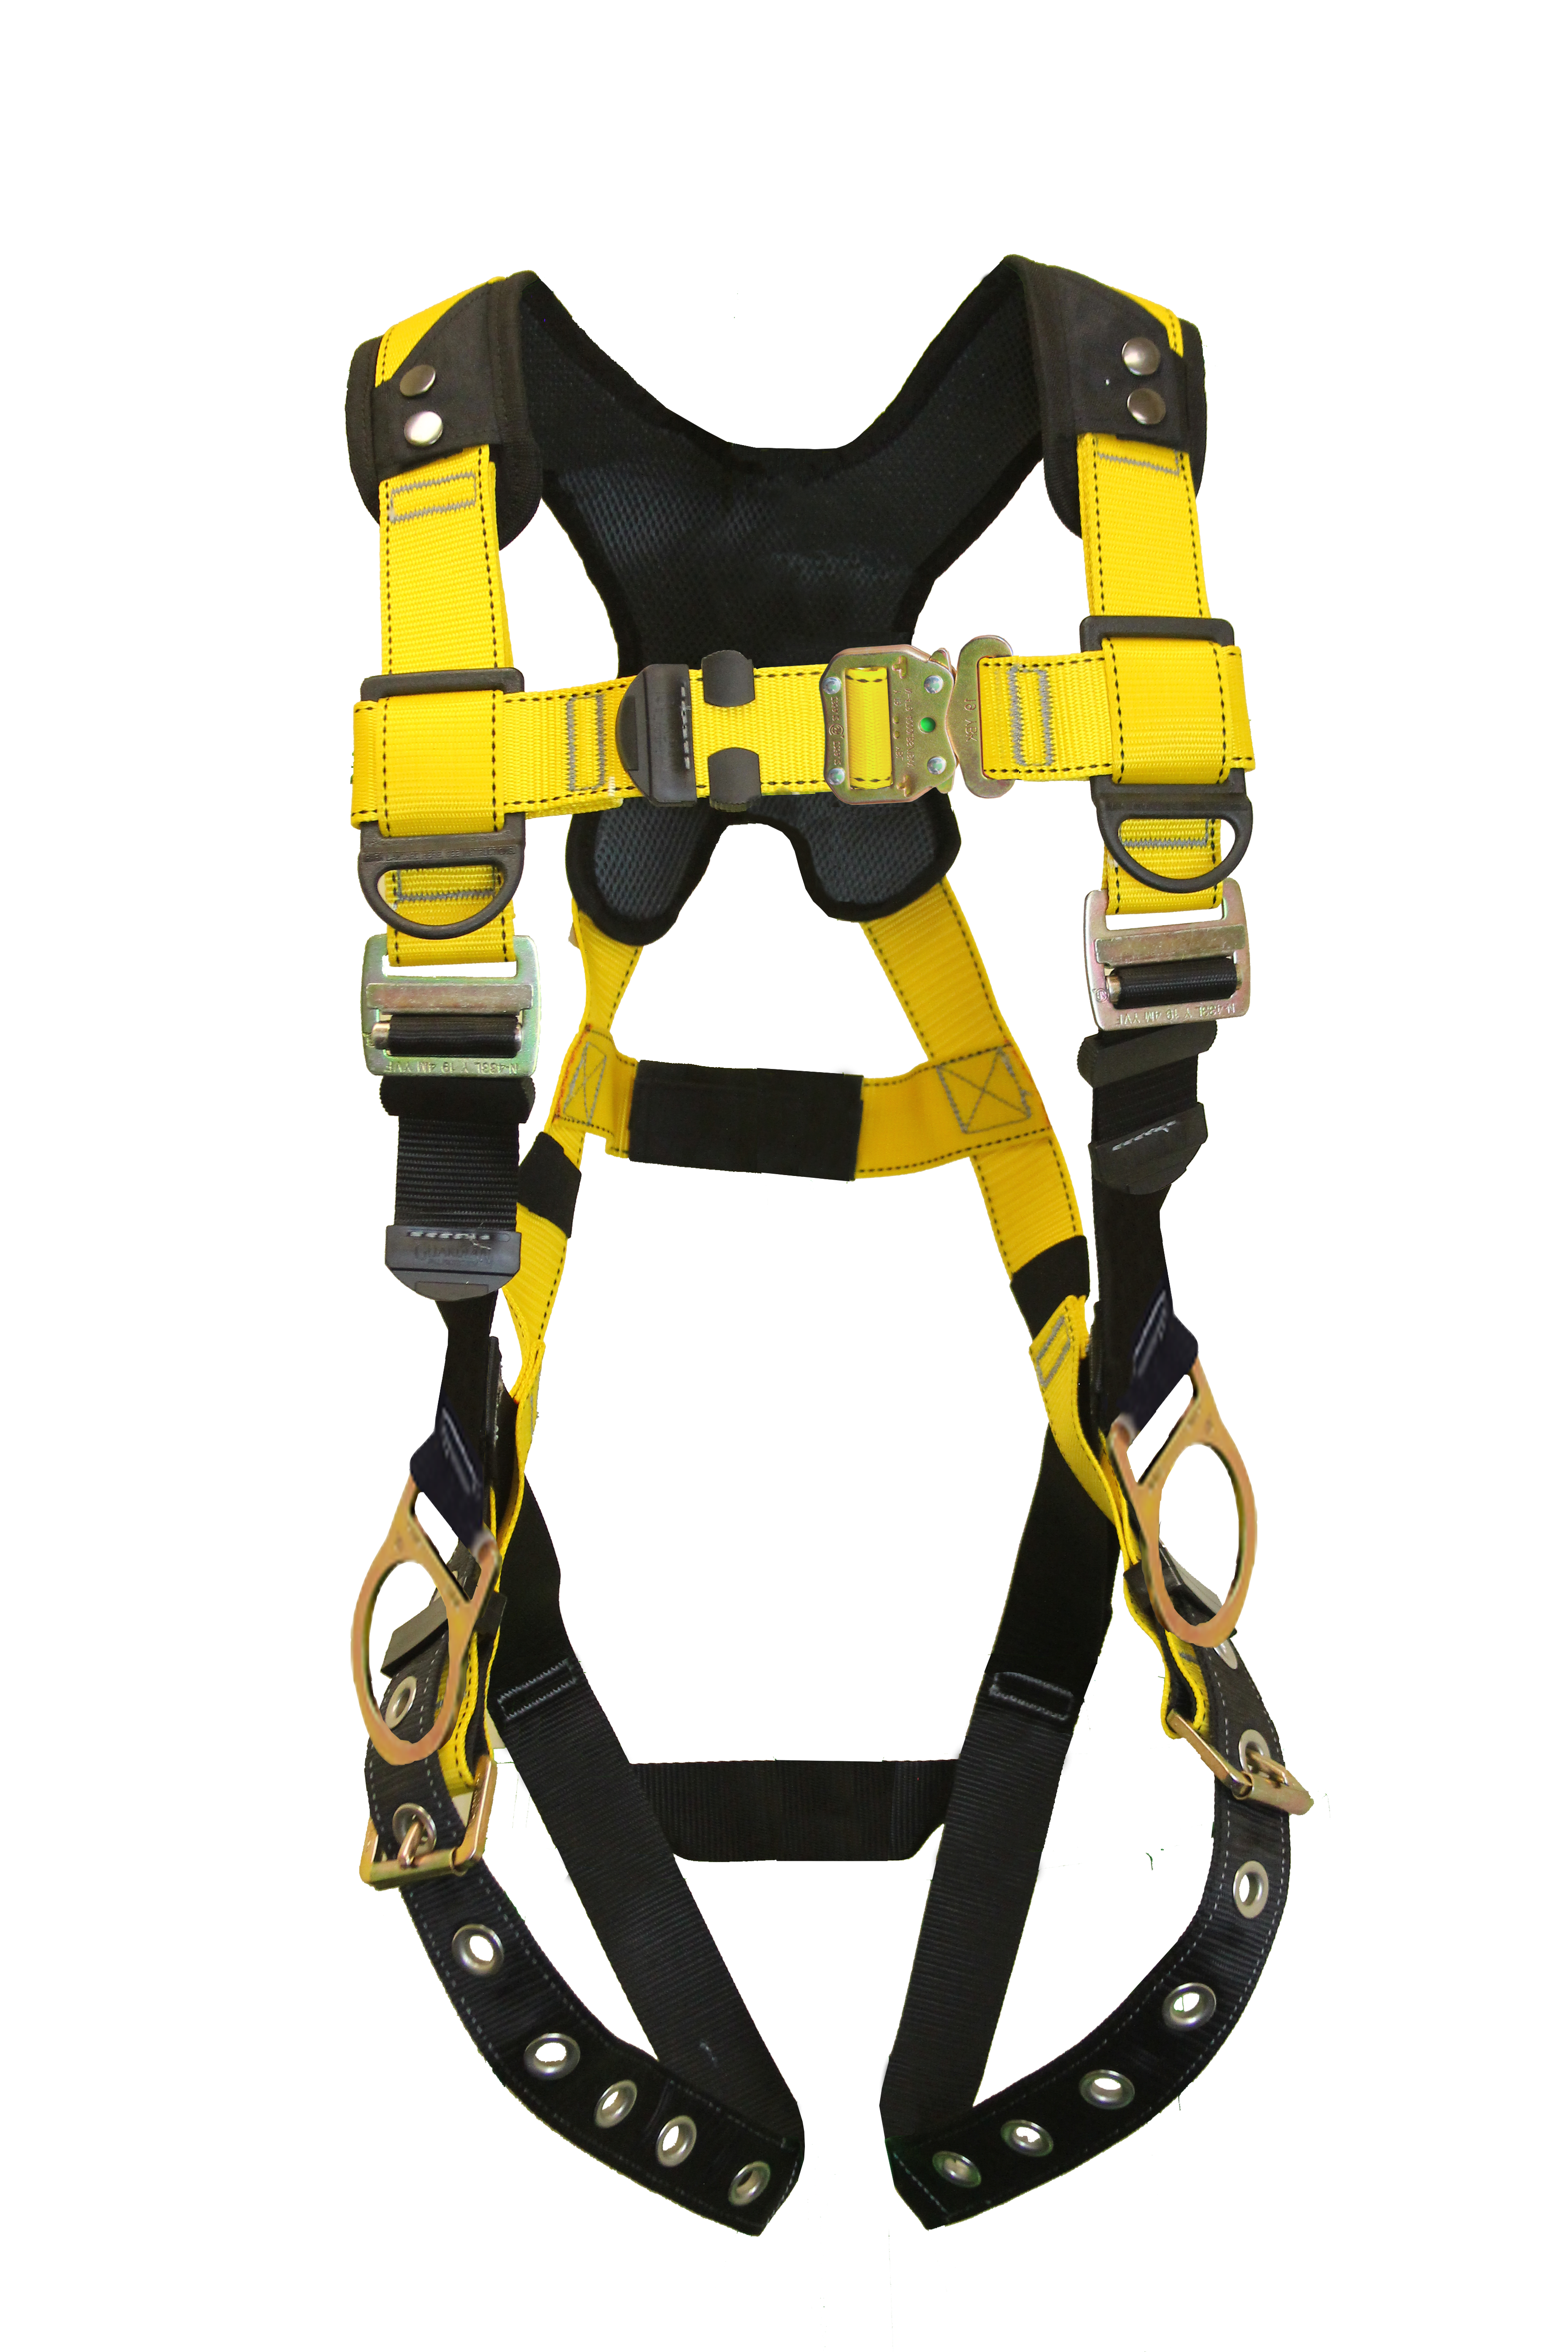 The full-body fall protection harness.